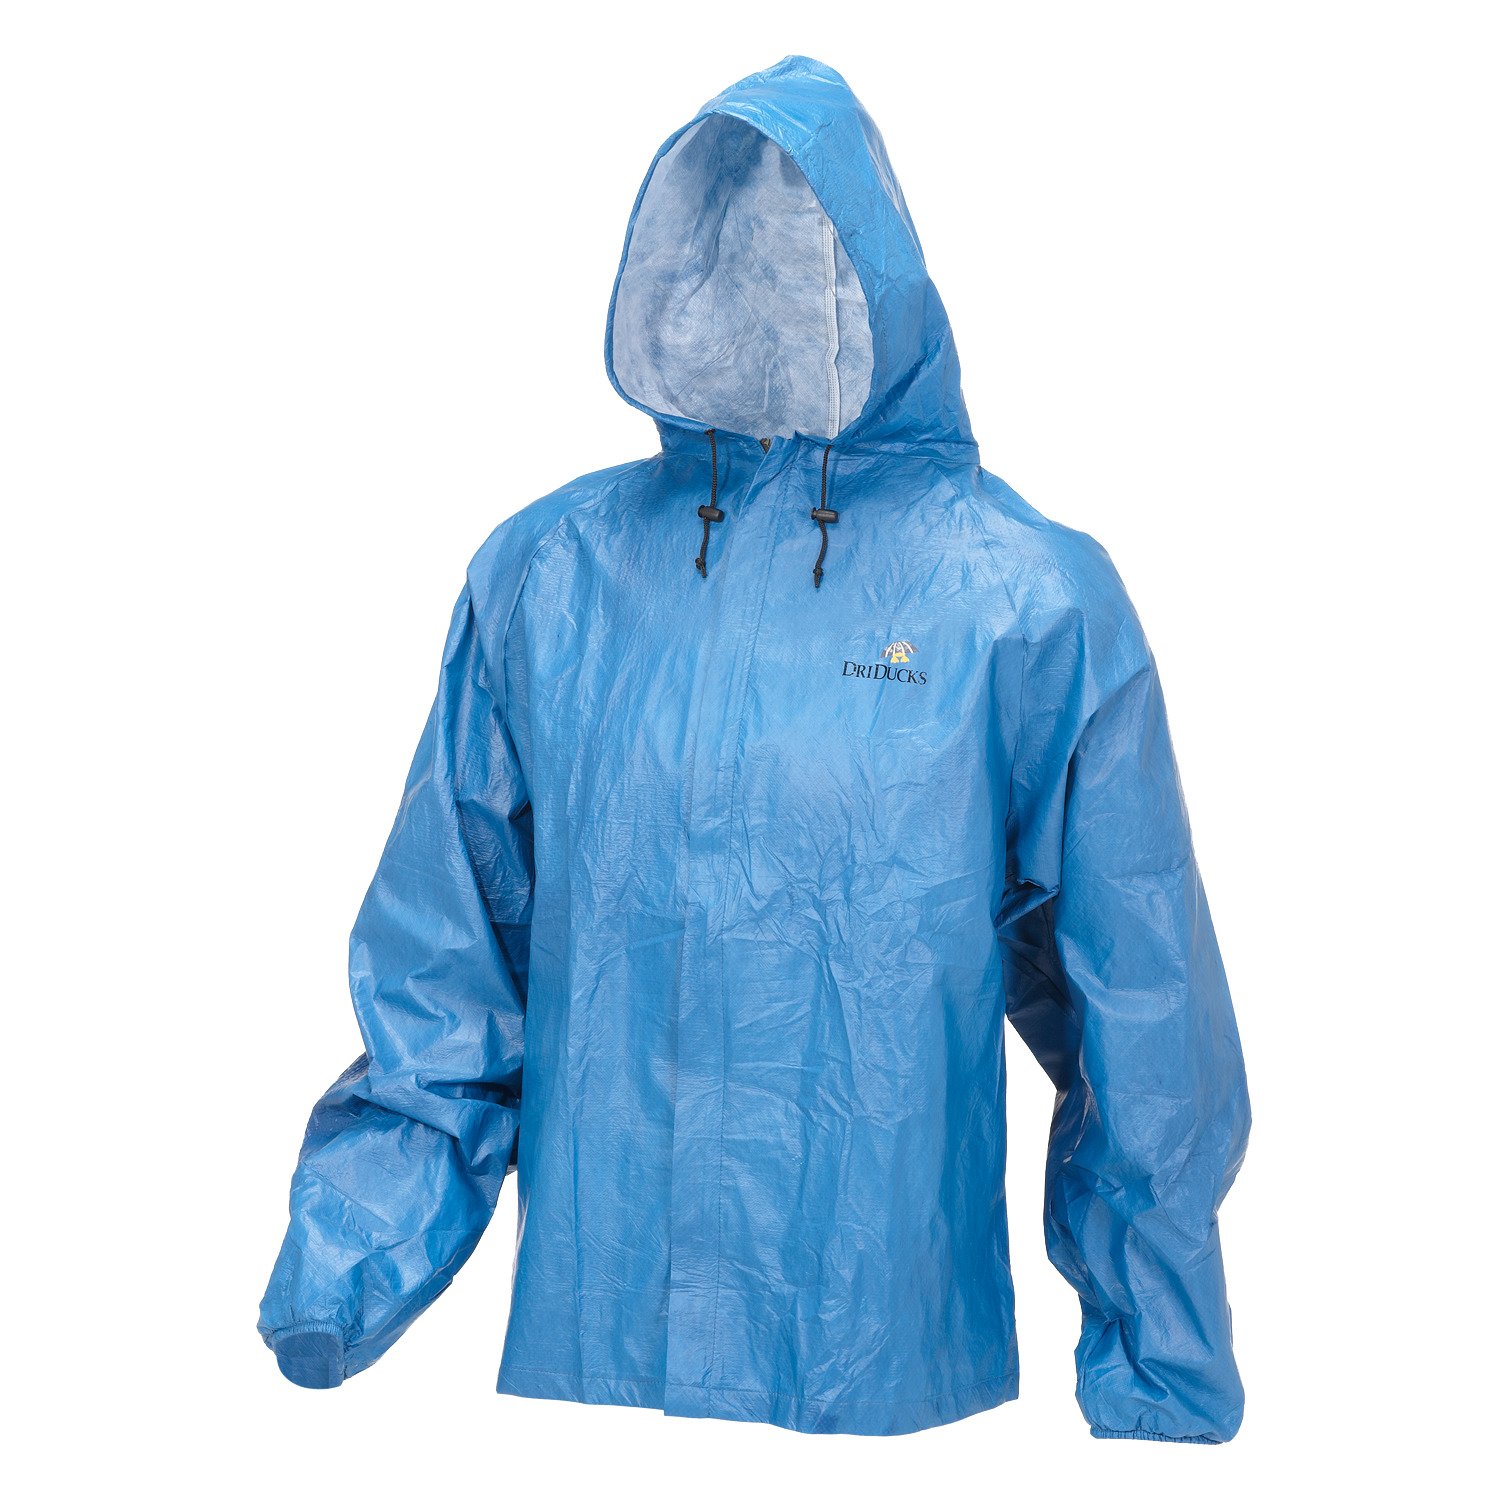 Frogg Toggs Adults' Ultra Lite Rain Suit                                                                                         - view number 1 selected